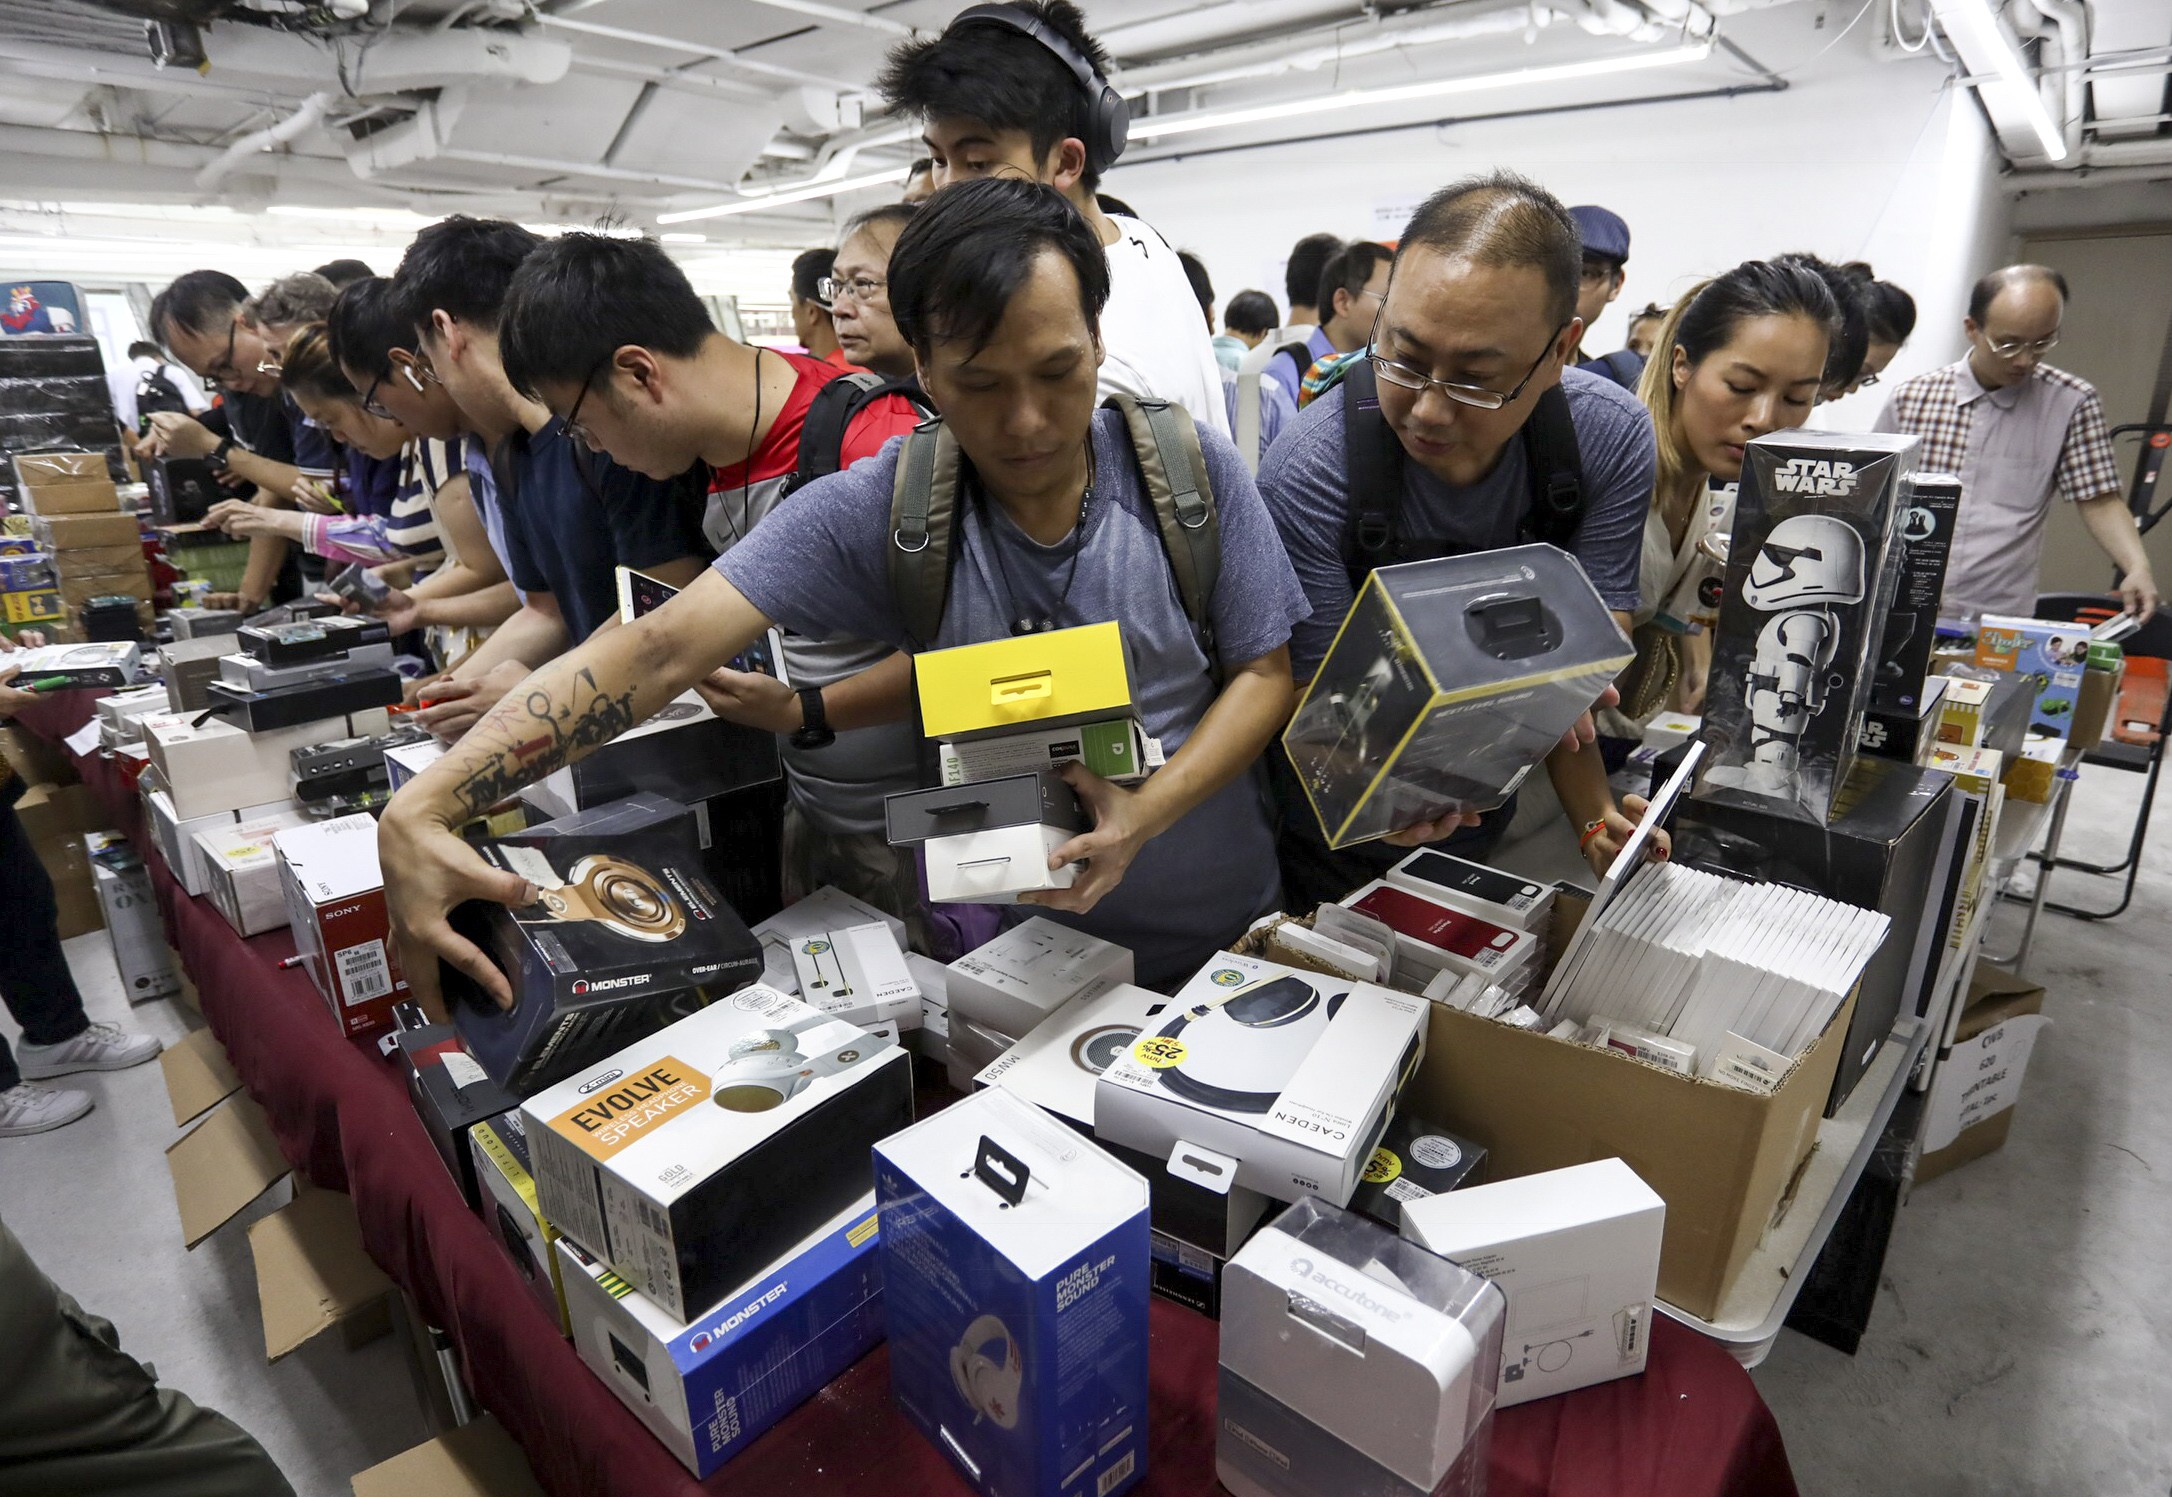 HMV’s liquidation sale at W Square in Wan Chai feature more than 100,000 items ranging from CDs to toys. Photo: Jonathan Wong